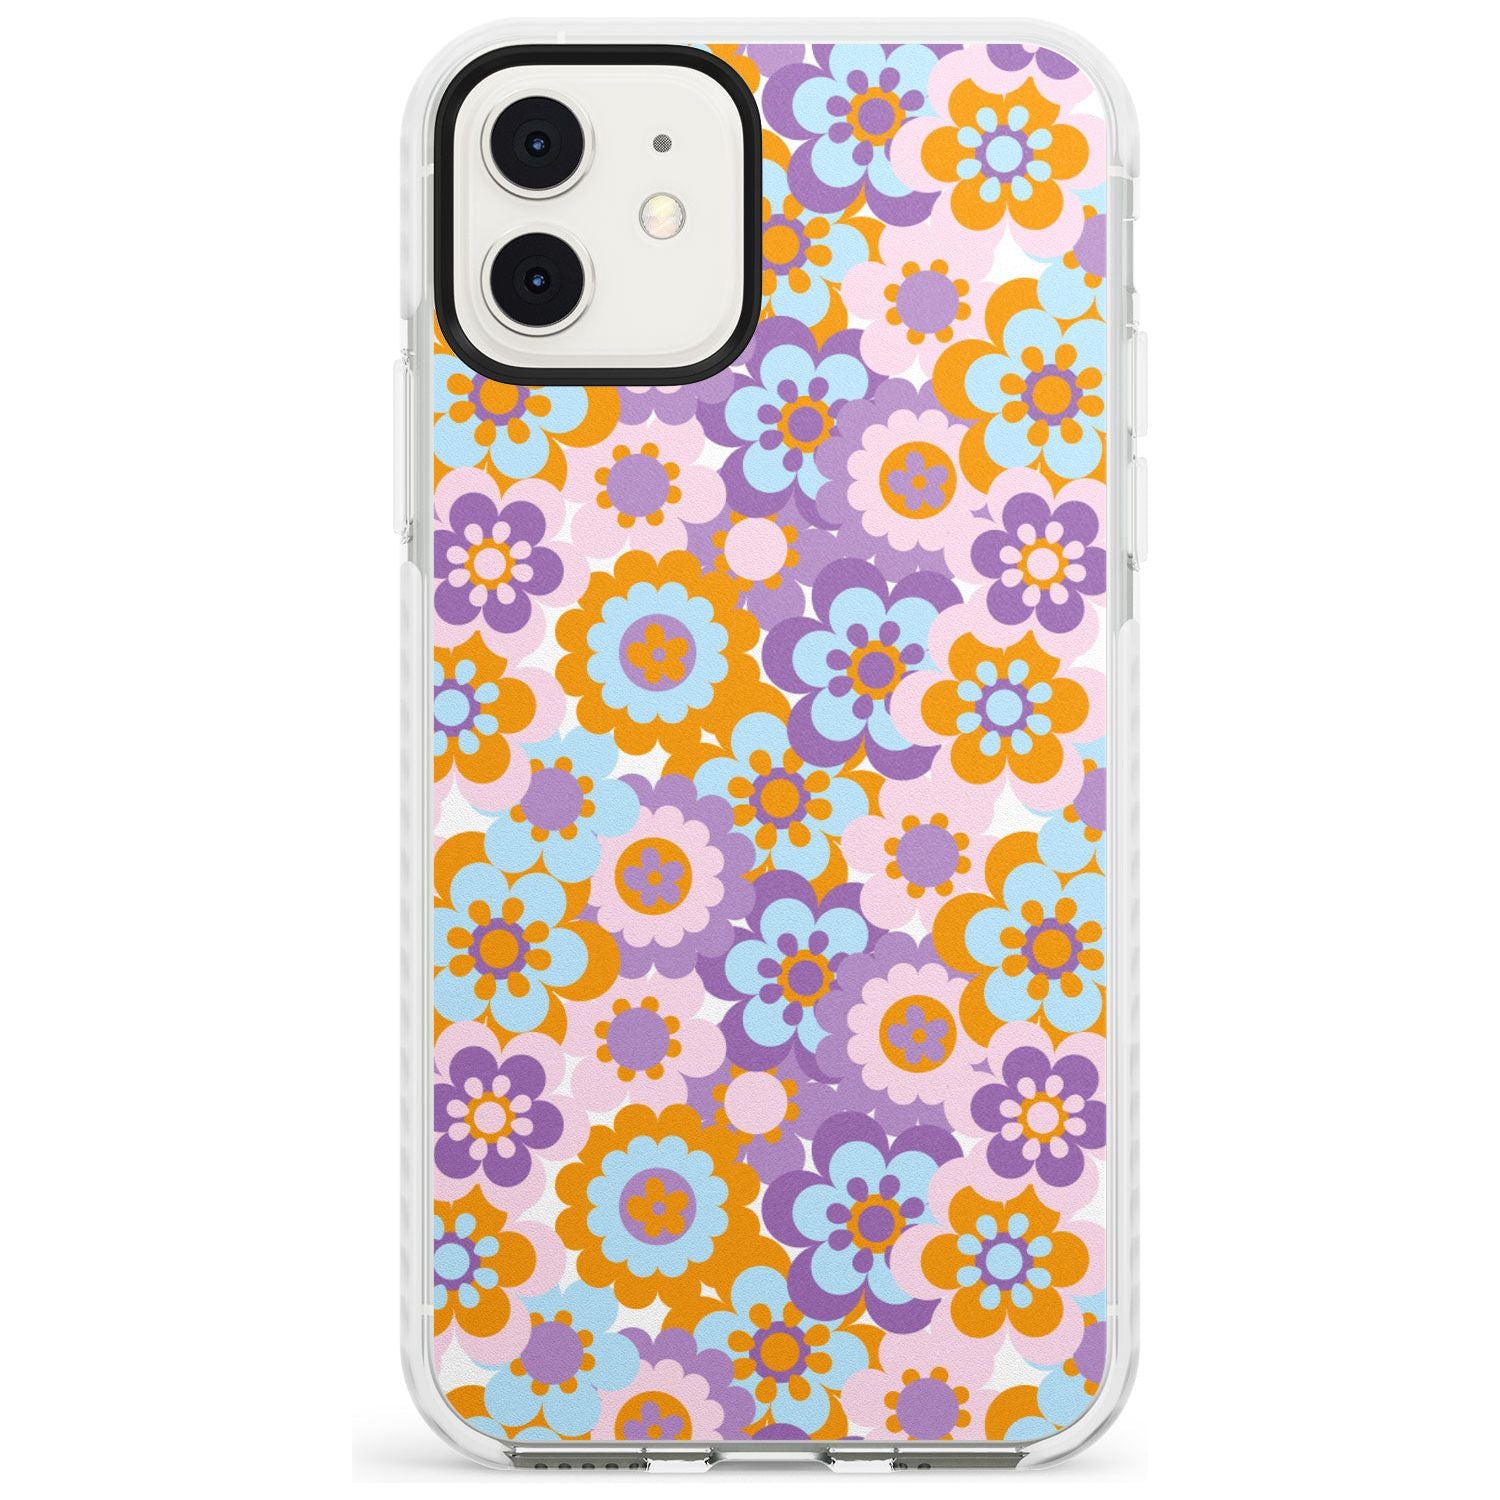 Flower Power Pattern Impact Phone Case for iPhone 11